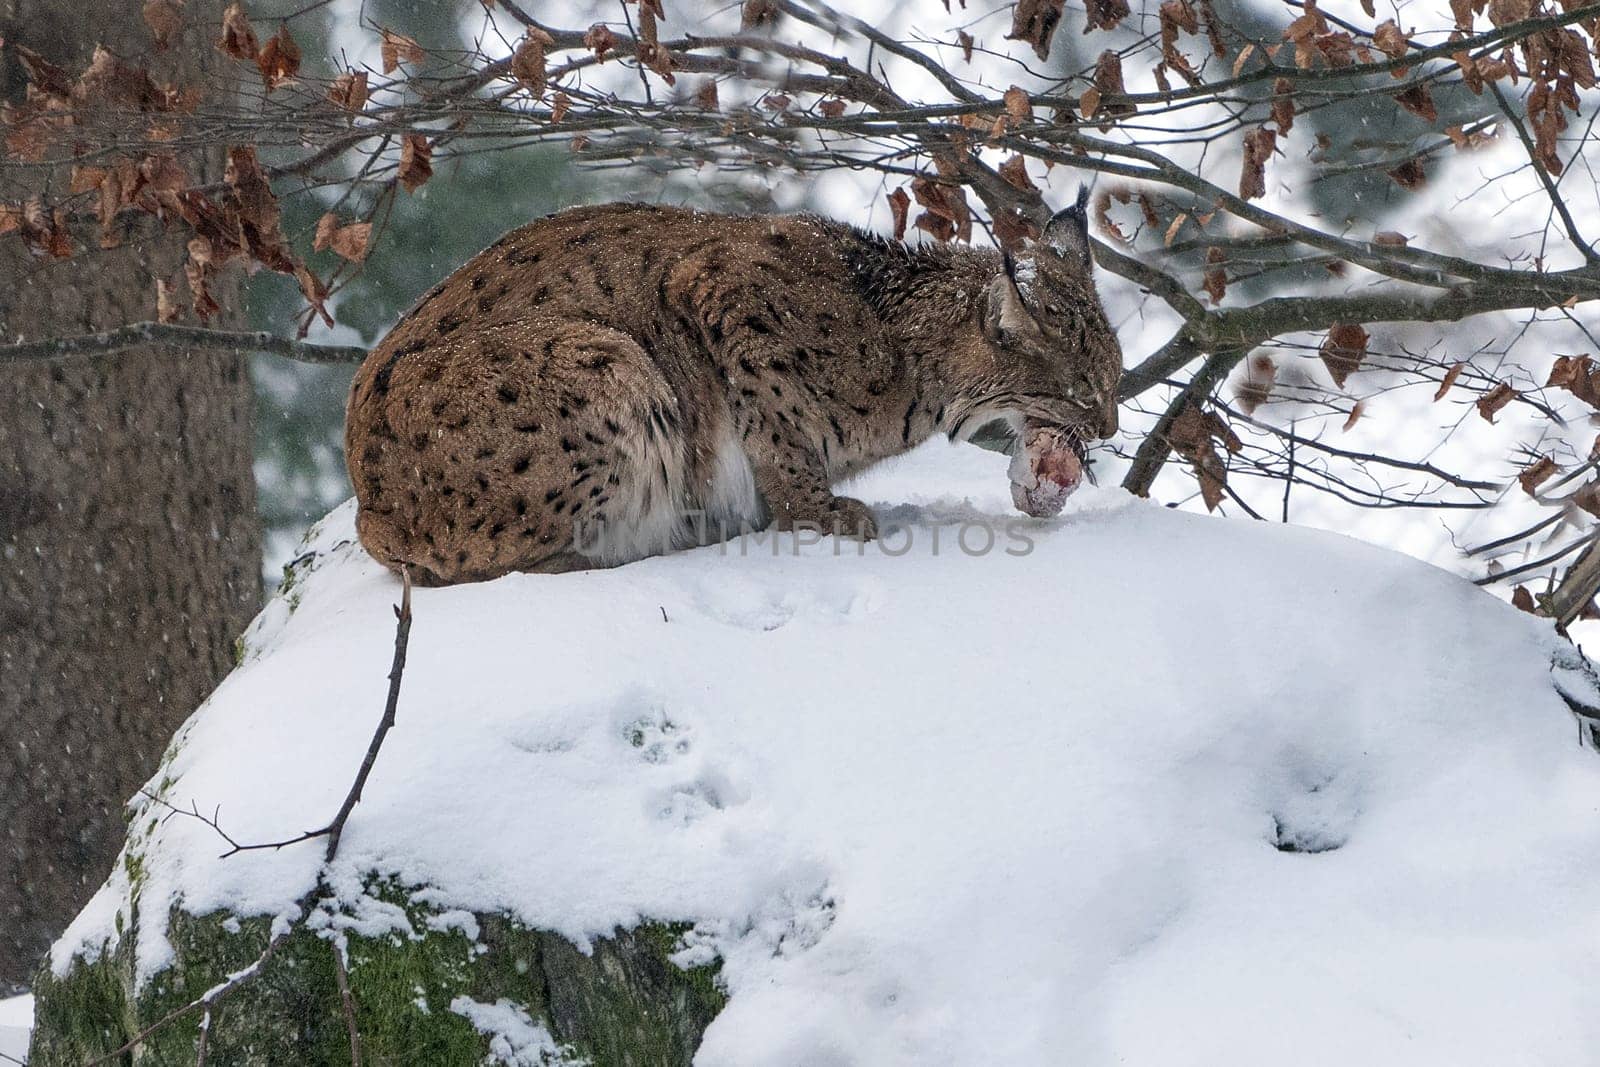 hunting caught a mouse in mouth Eurasian Lynx walking, wild cat in the forest with snow. Wildlife scene from winter nature.